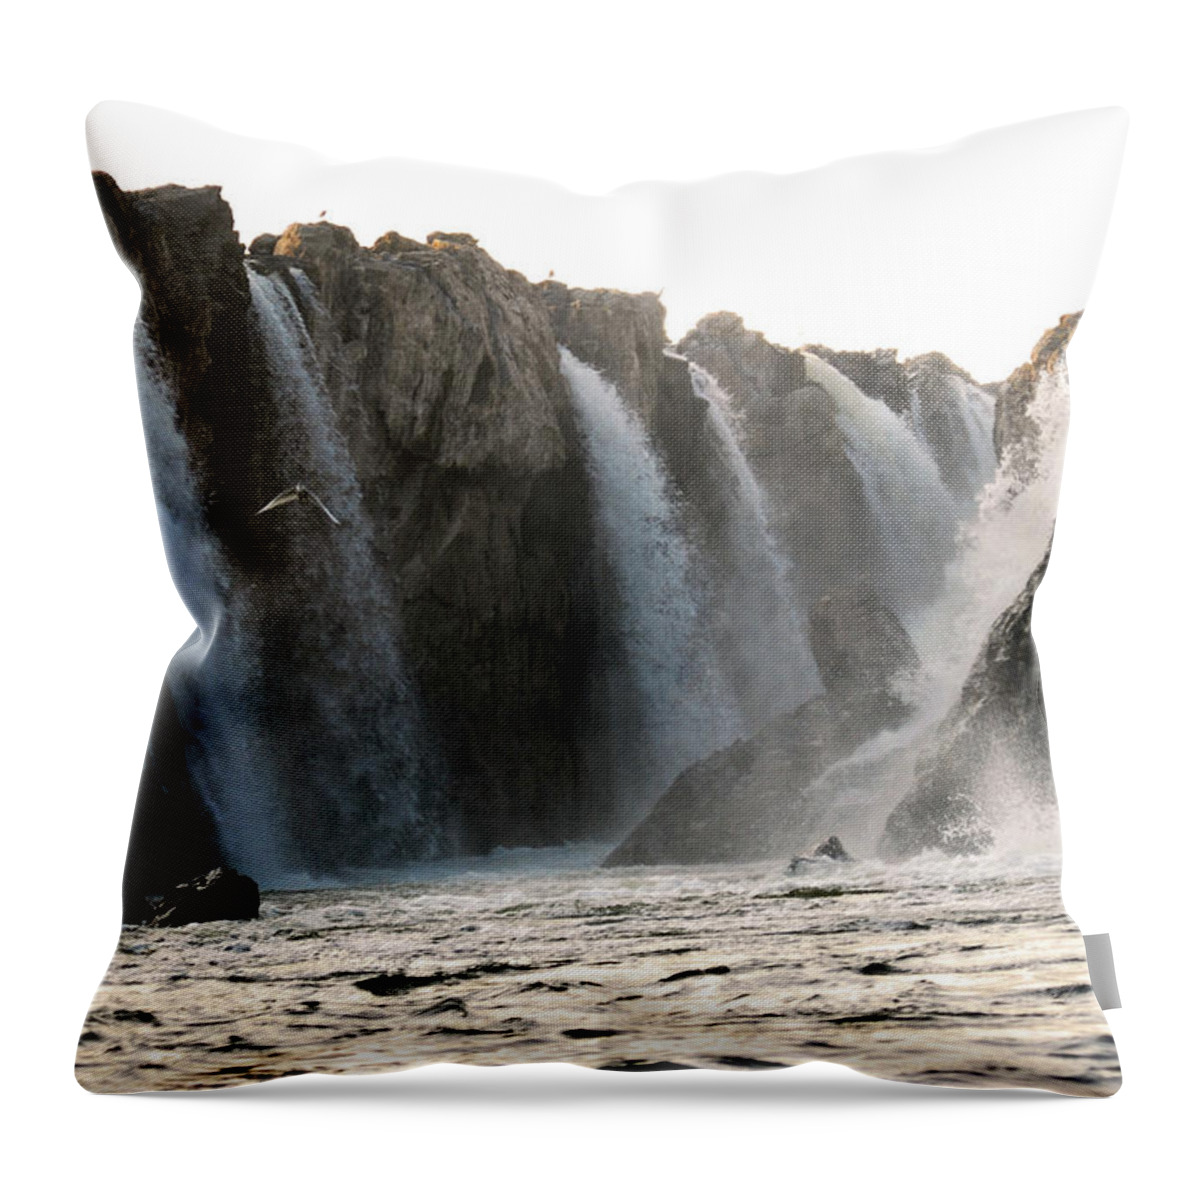 Scenics Throw Pillow featuring the photograph Time For Returning To Nest by Rabindranath Chakraborty Photography